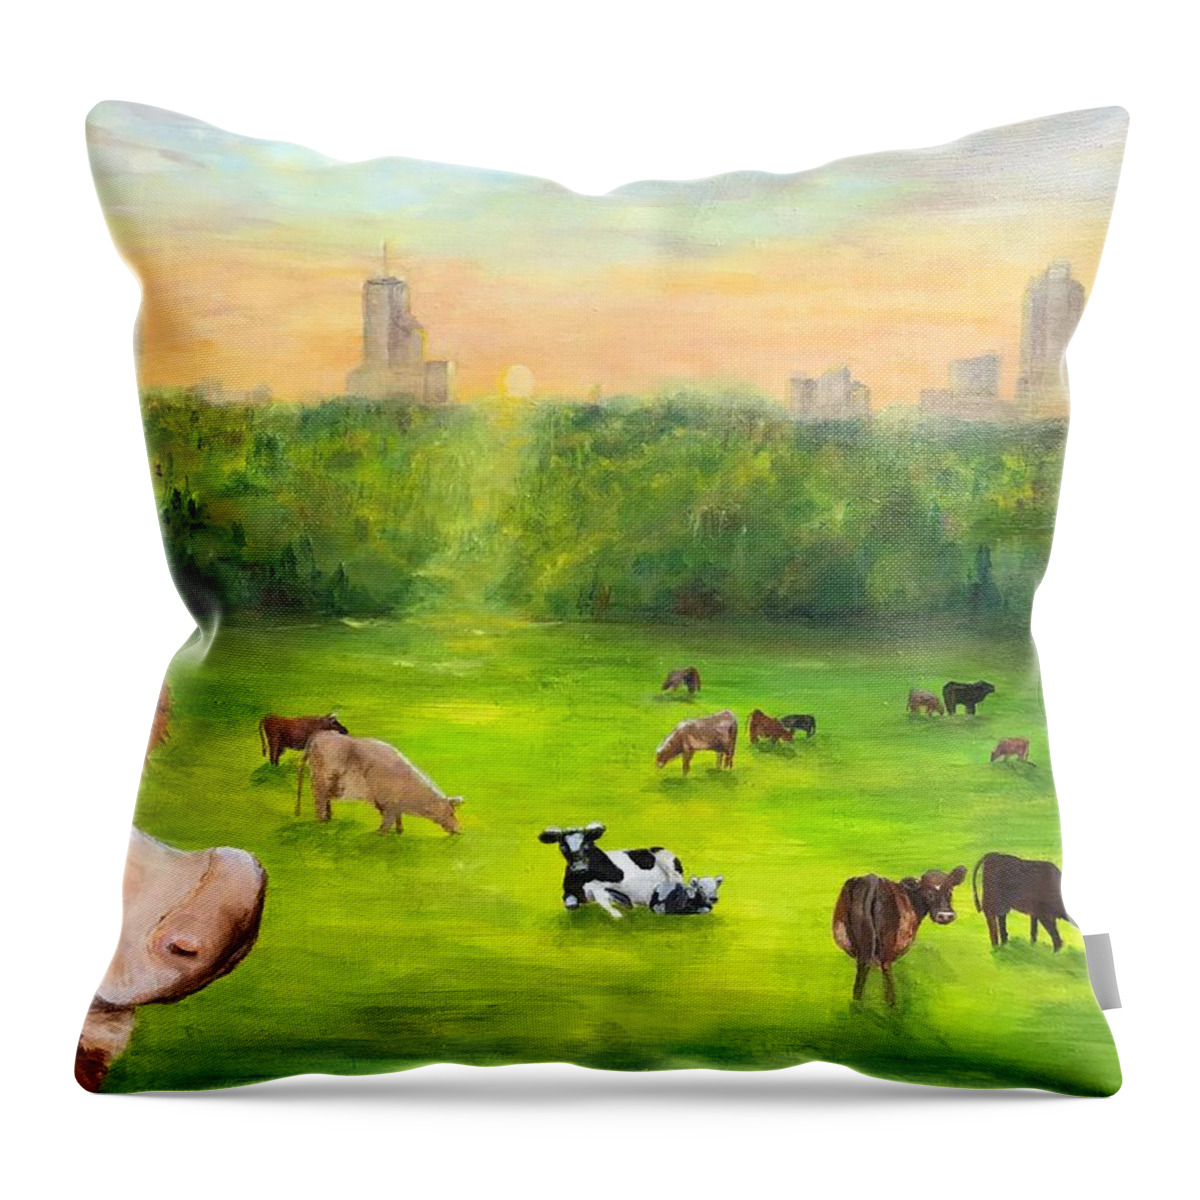 Curious Throw Pillow featuring the painting Curious Cow by Deborah Naves